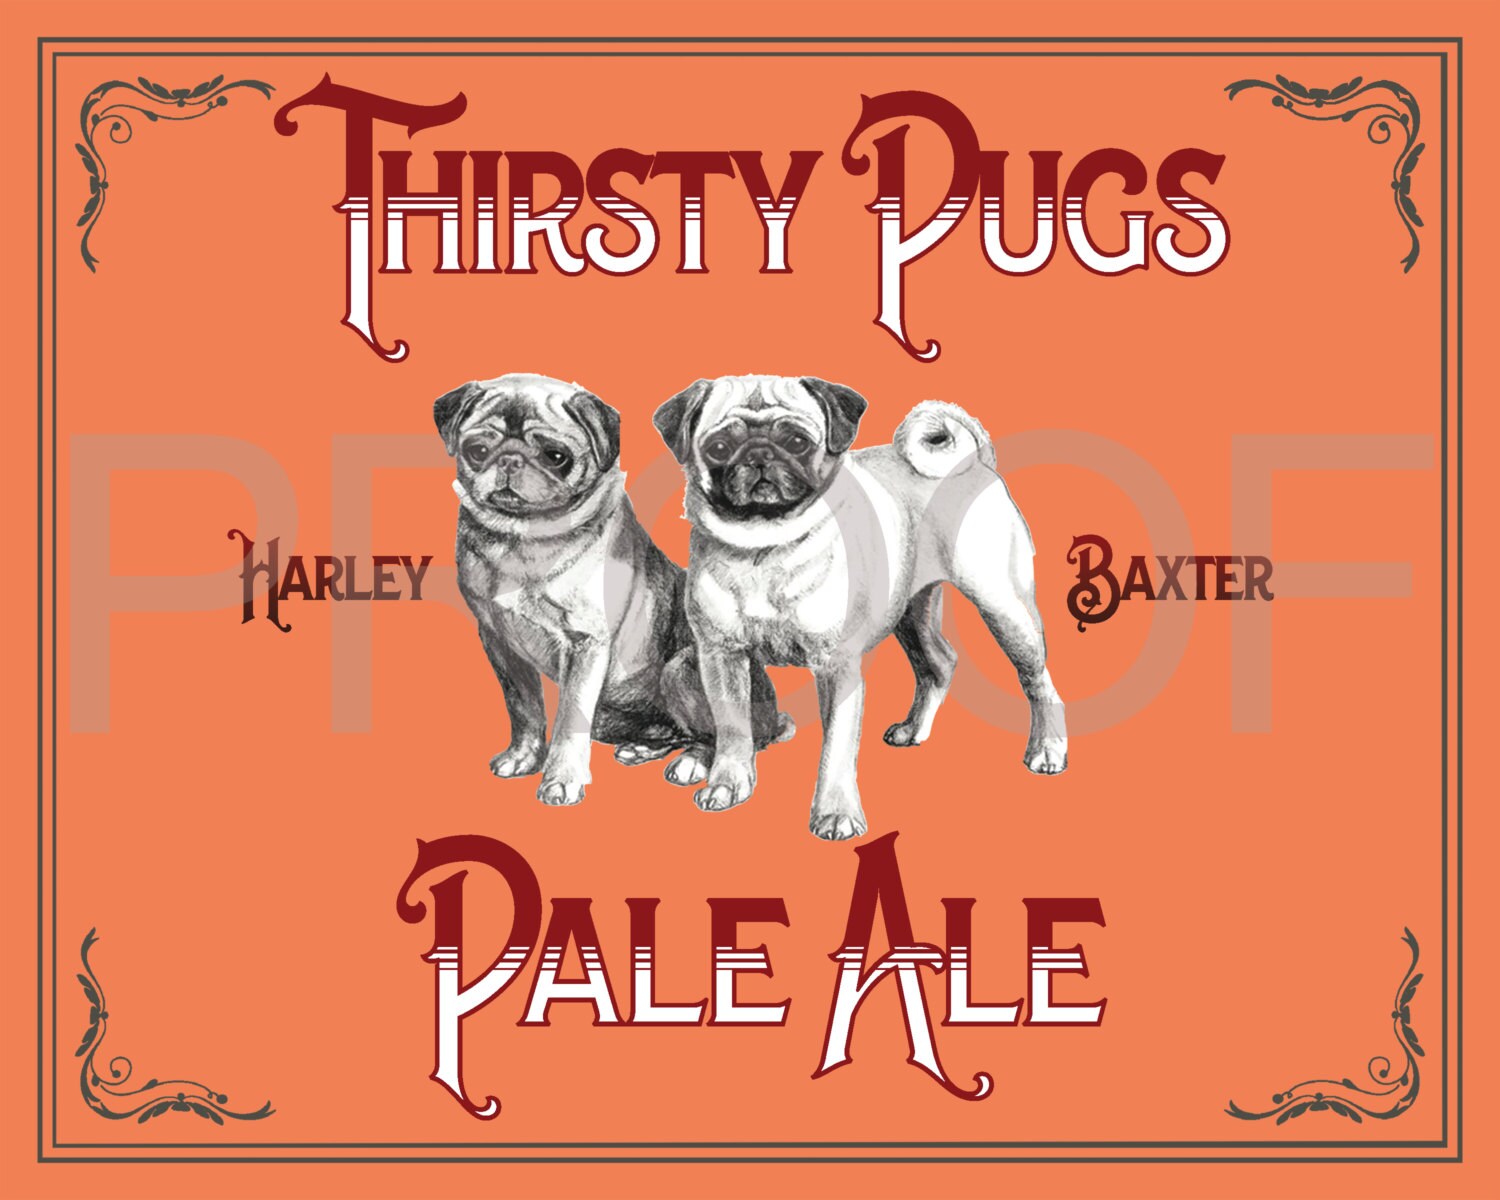 BAR ART Thirsty Pugs Pale Ale Art Print, For You To Print Man Cave Beer Bar Dog Dogs Download Art